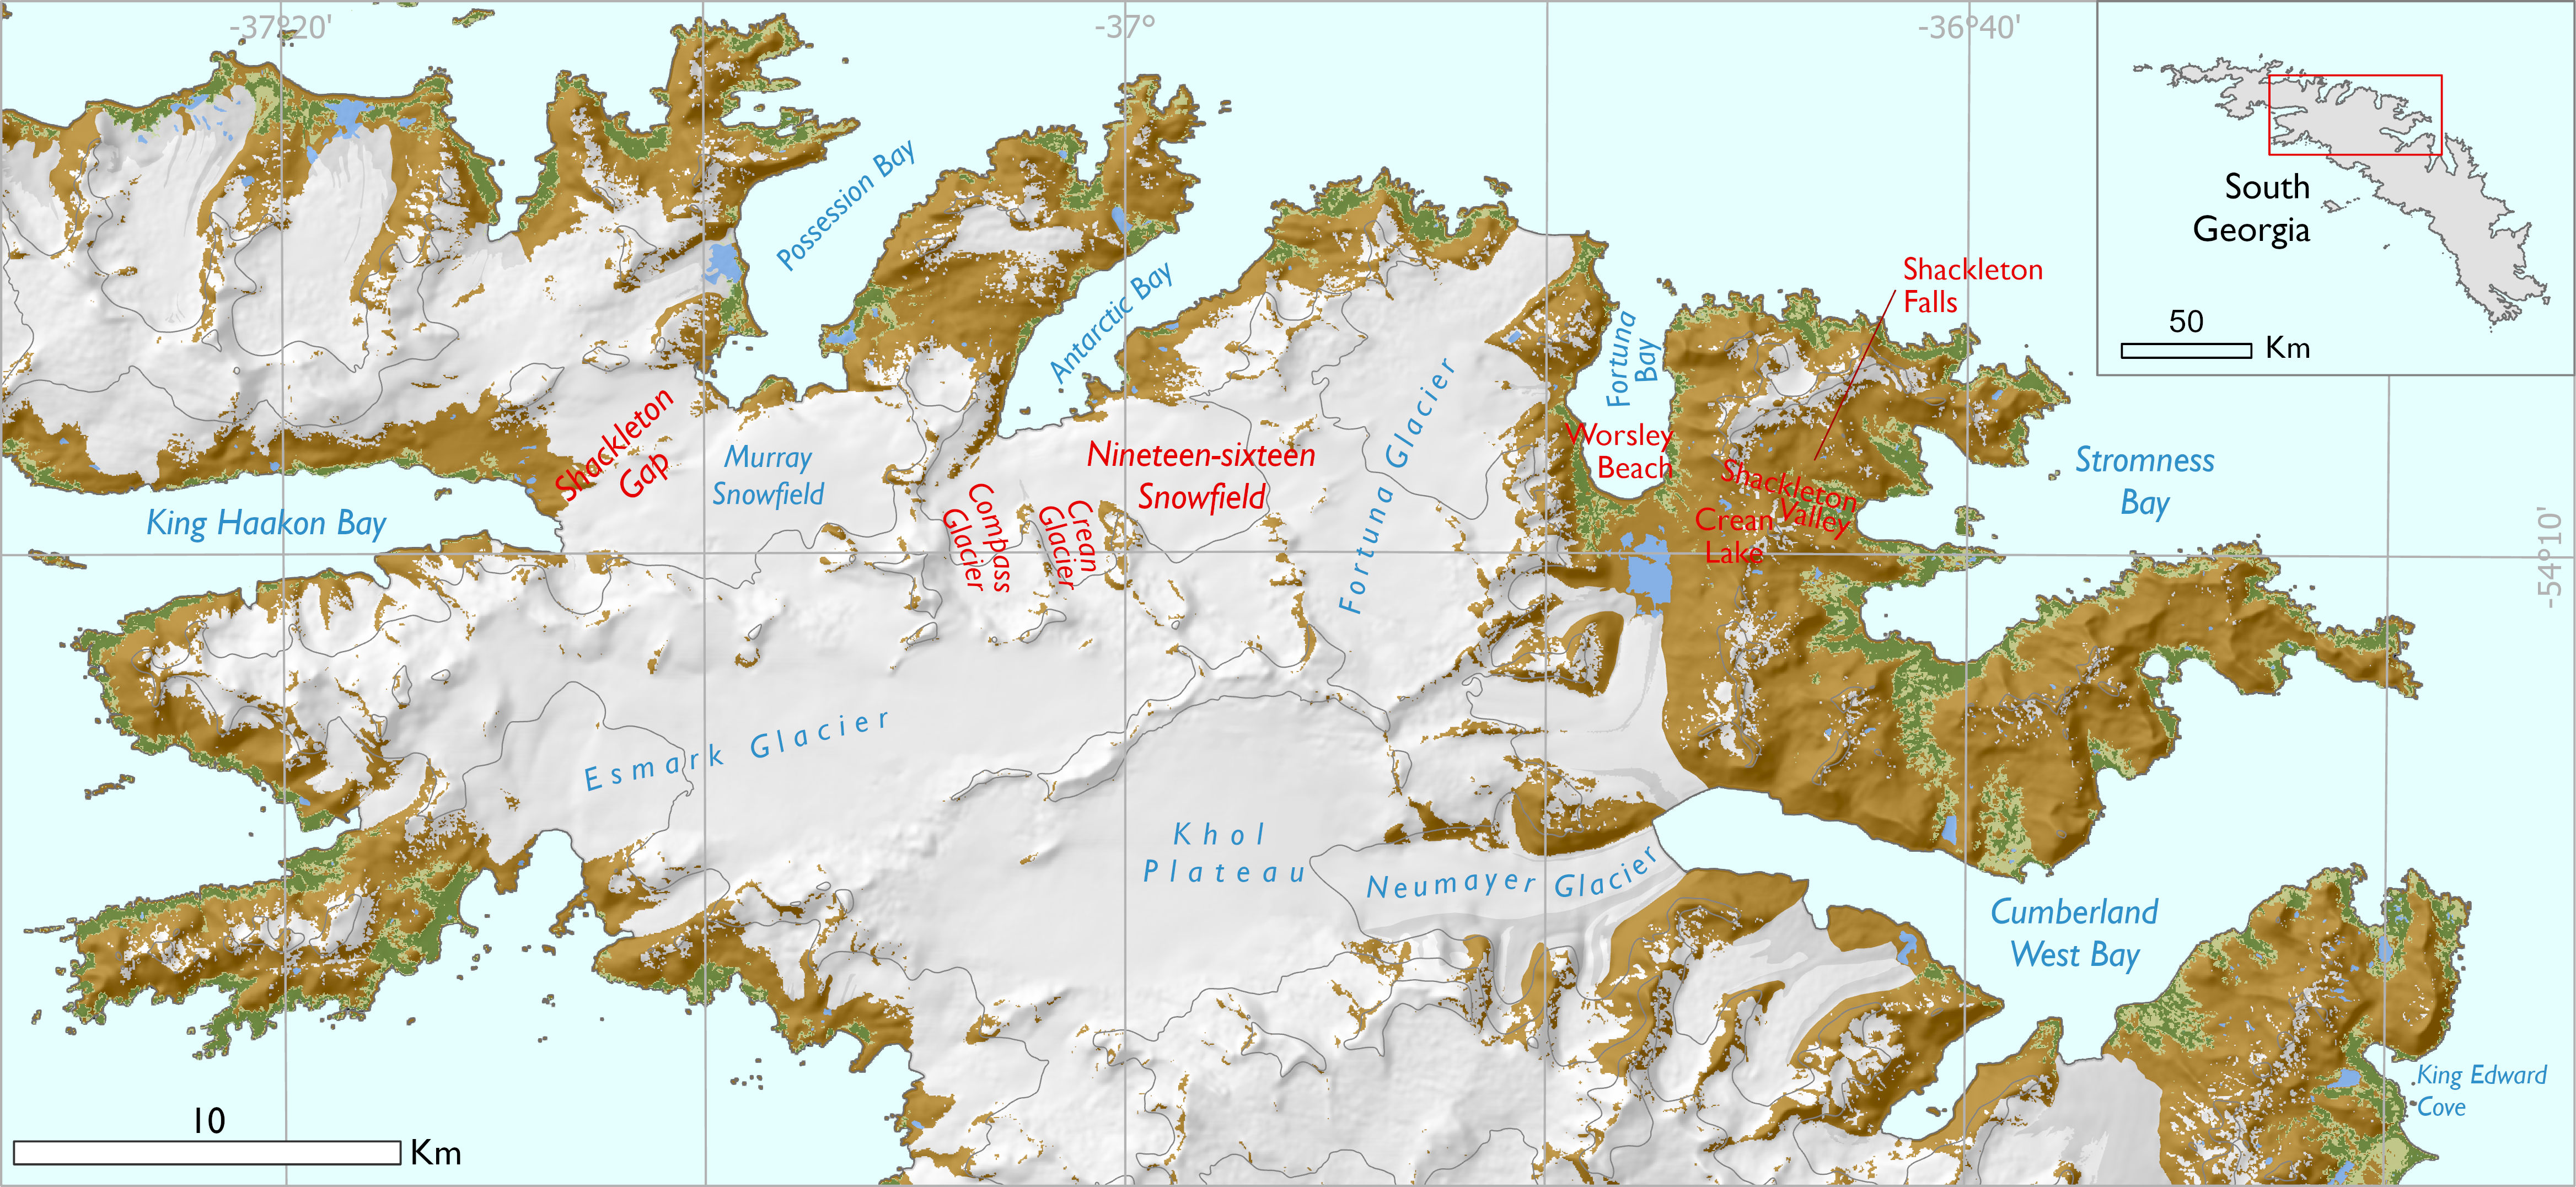 Map showing place names related to Shackleton across South Georgia